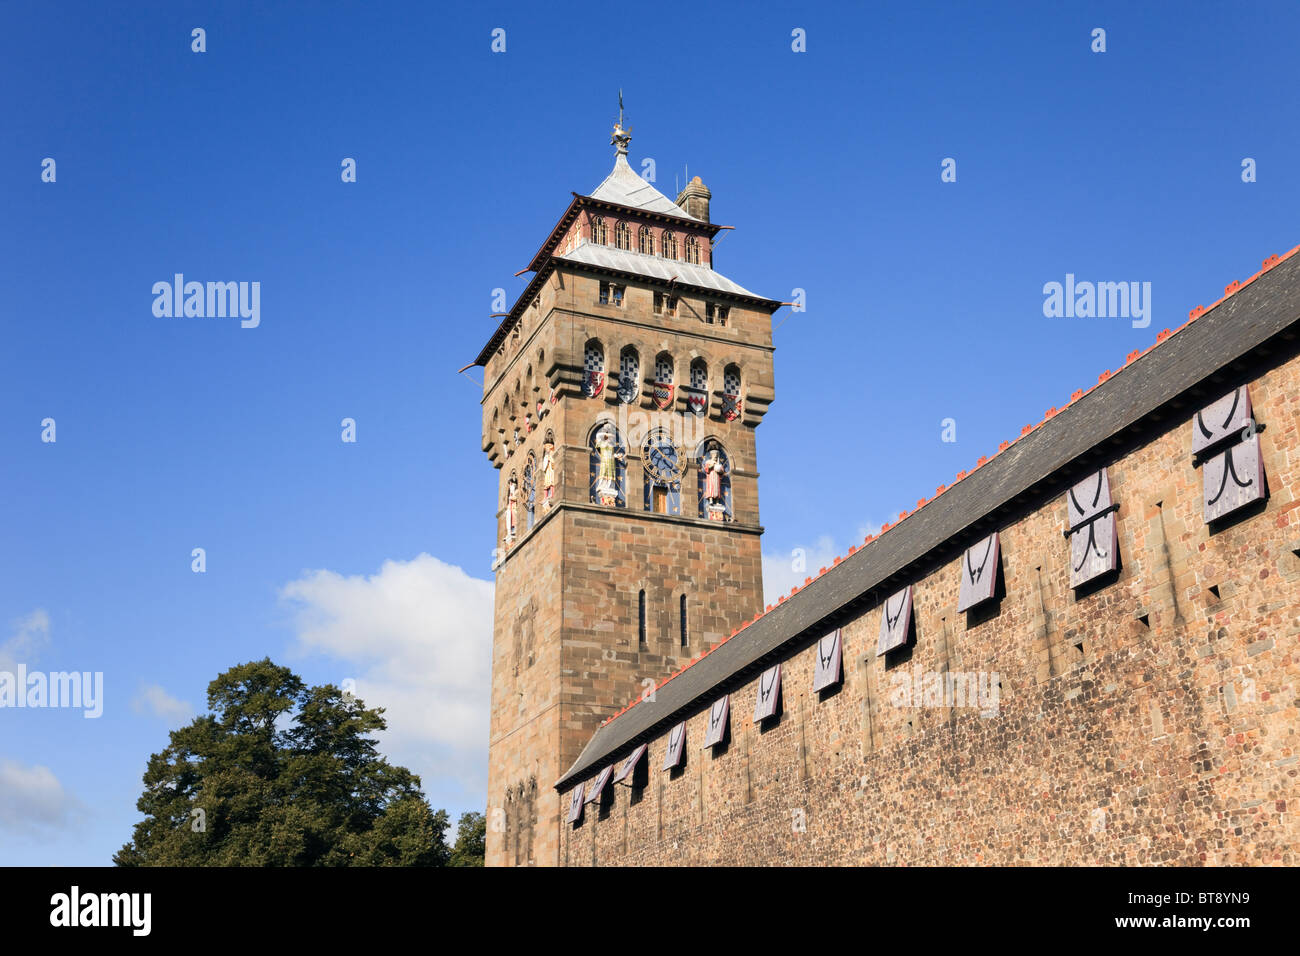 Cardiff, South Glamorgan, South Wales, UK. Cardiff castle clock tower and walls Stock Photo